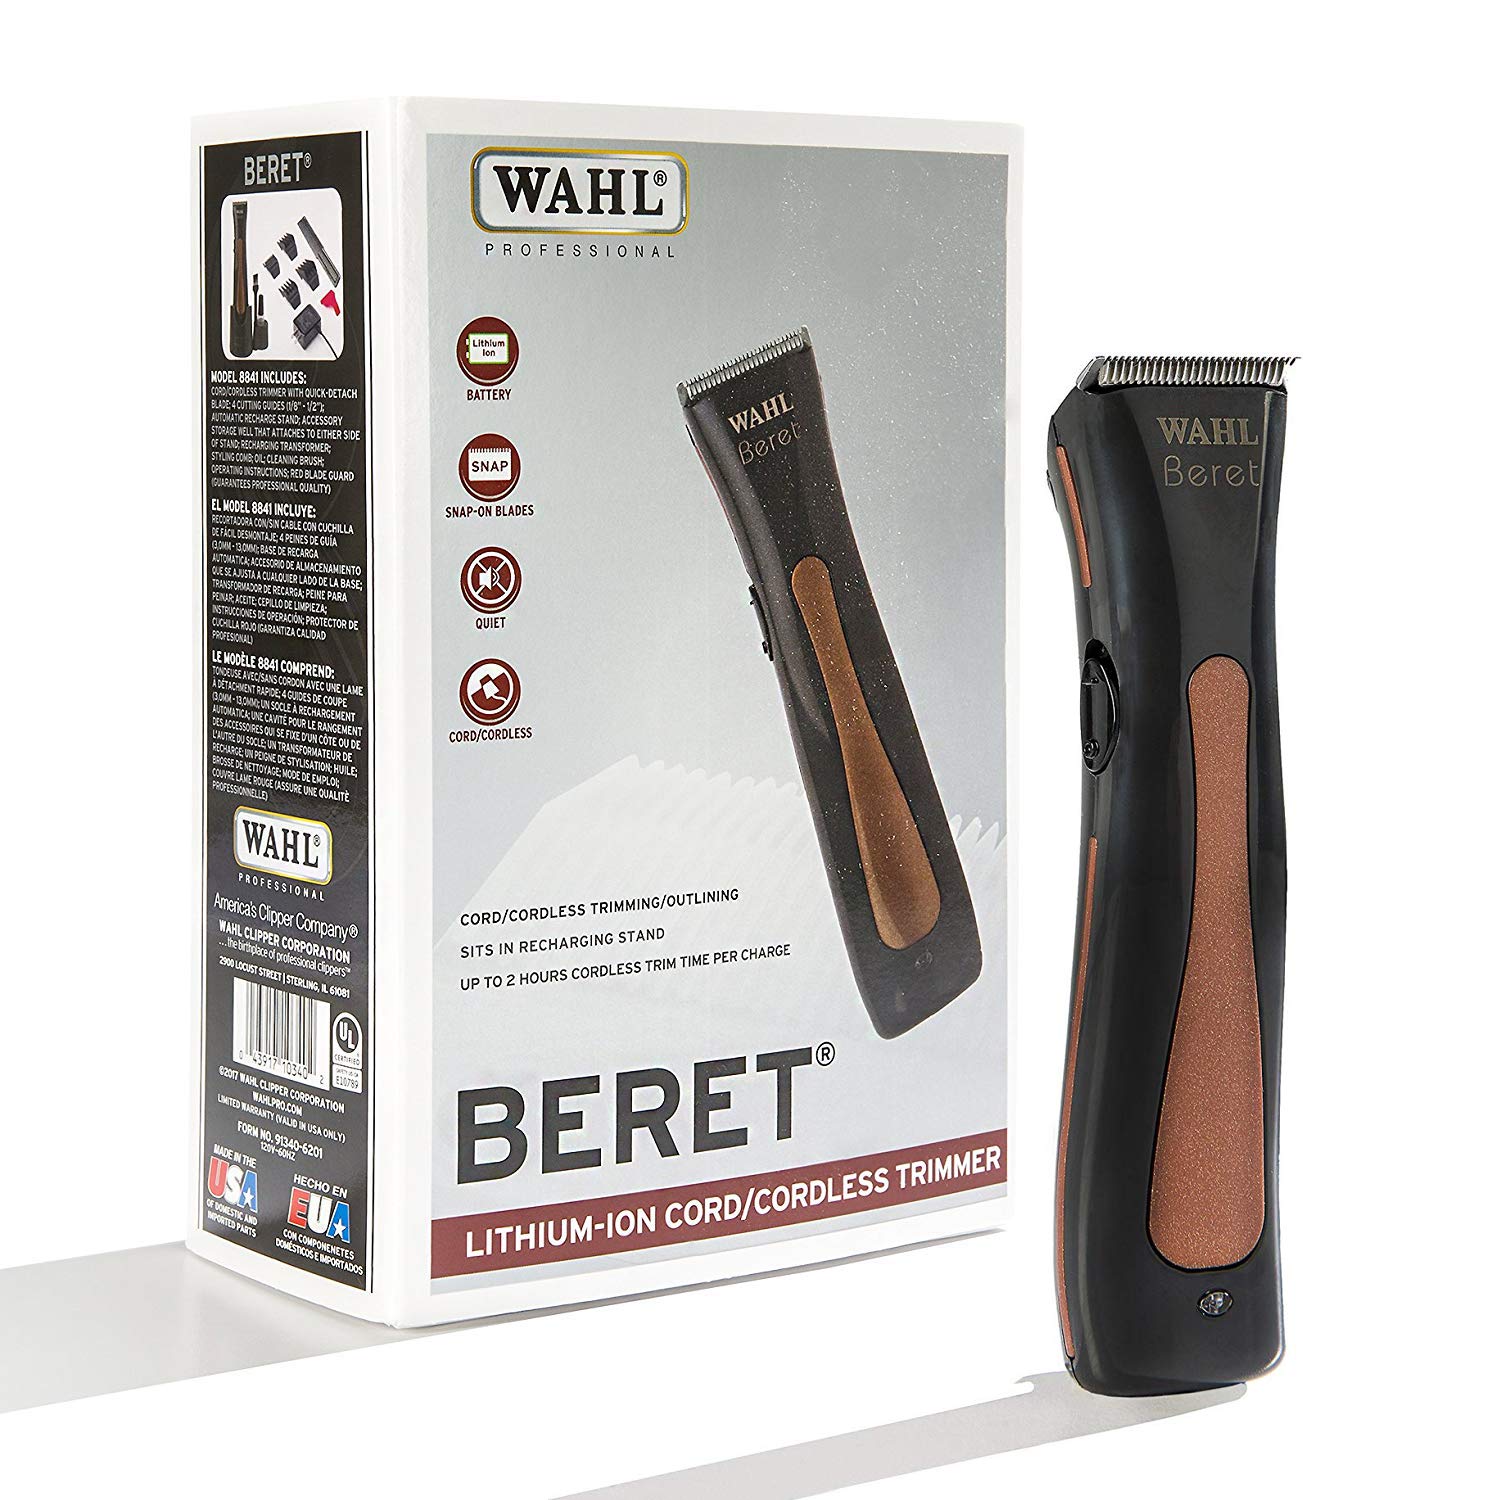 Wahl Professional- Beret Lithium Ion Cord Cordless Ultra Quiet Electric Trimmer for Professional Barbers and Stylists Model 8841